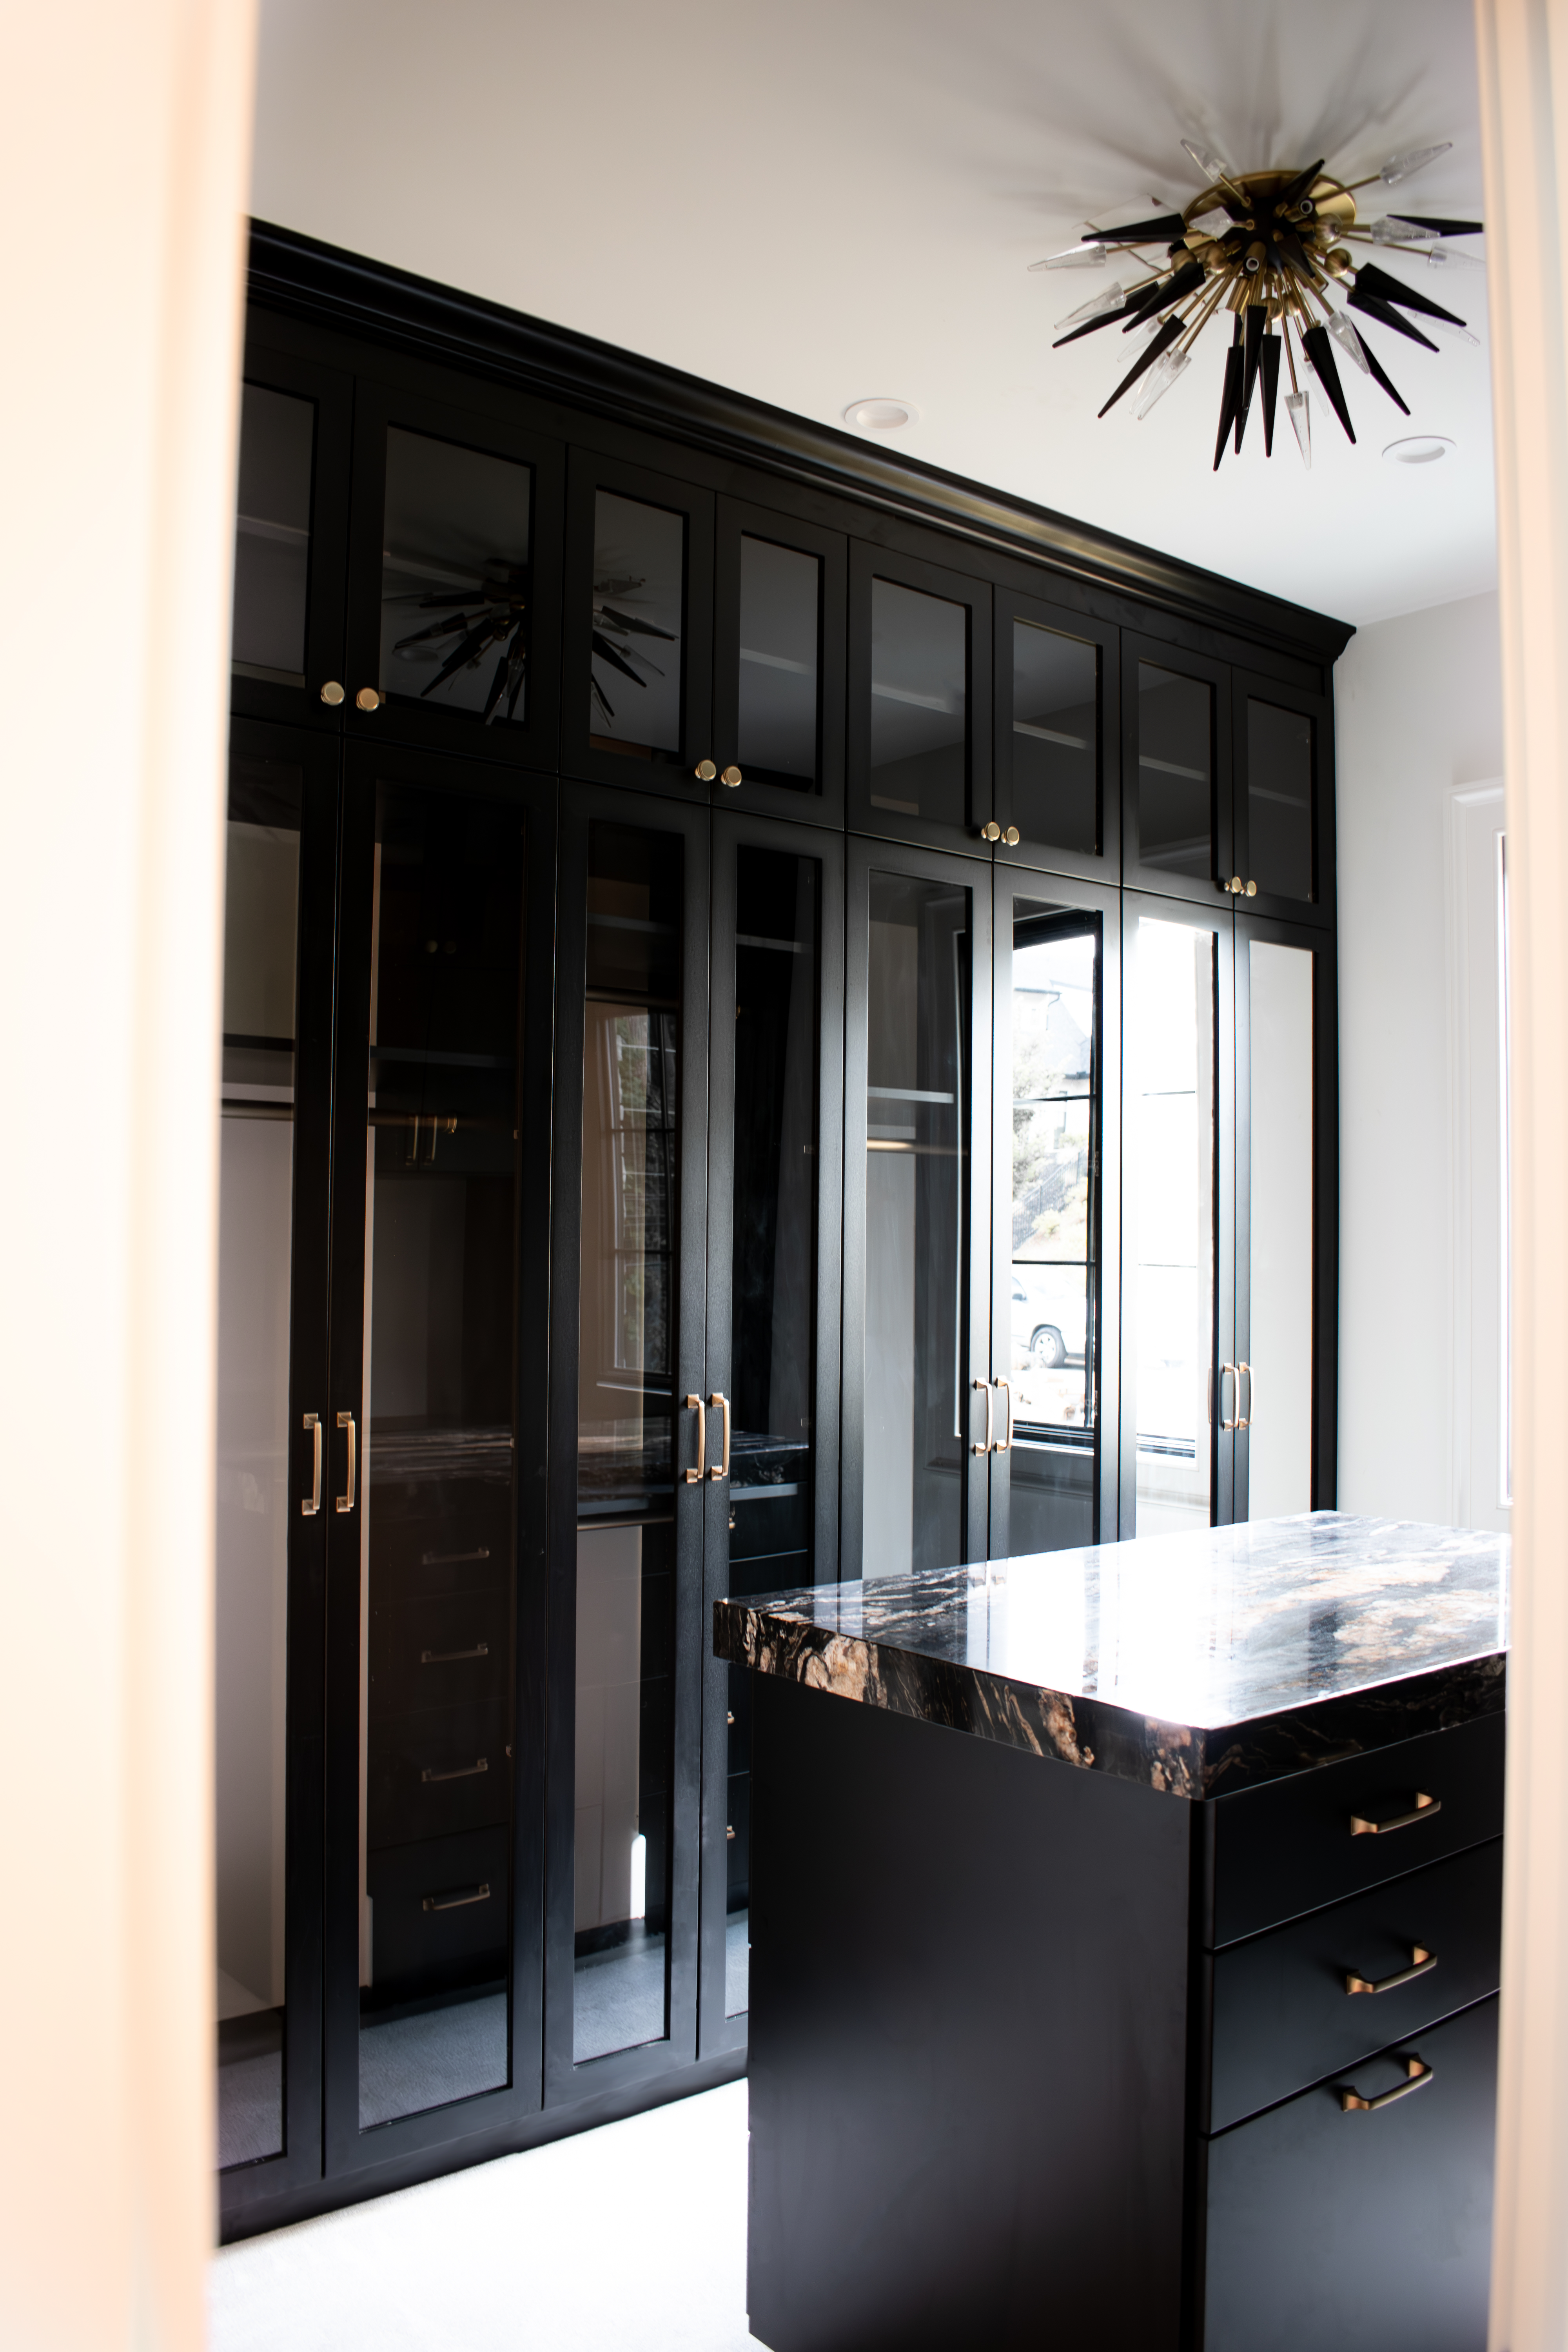 Custom Closets of GA black and gold walk-in closet with island. It contains 24 deep cabinets for hanging clothes, glass and mirrored doors, built-in hampers and drawers, crown molding, and shoe shelves.